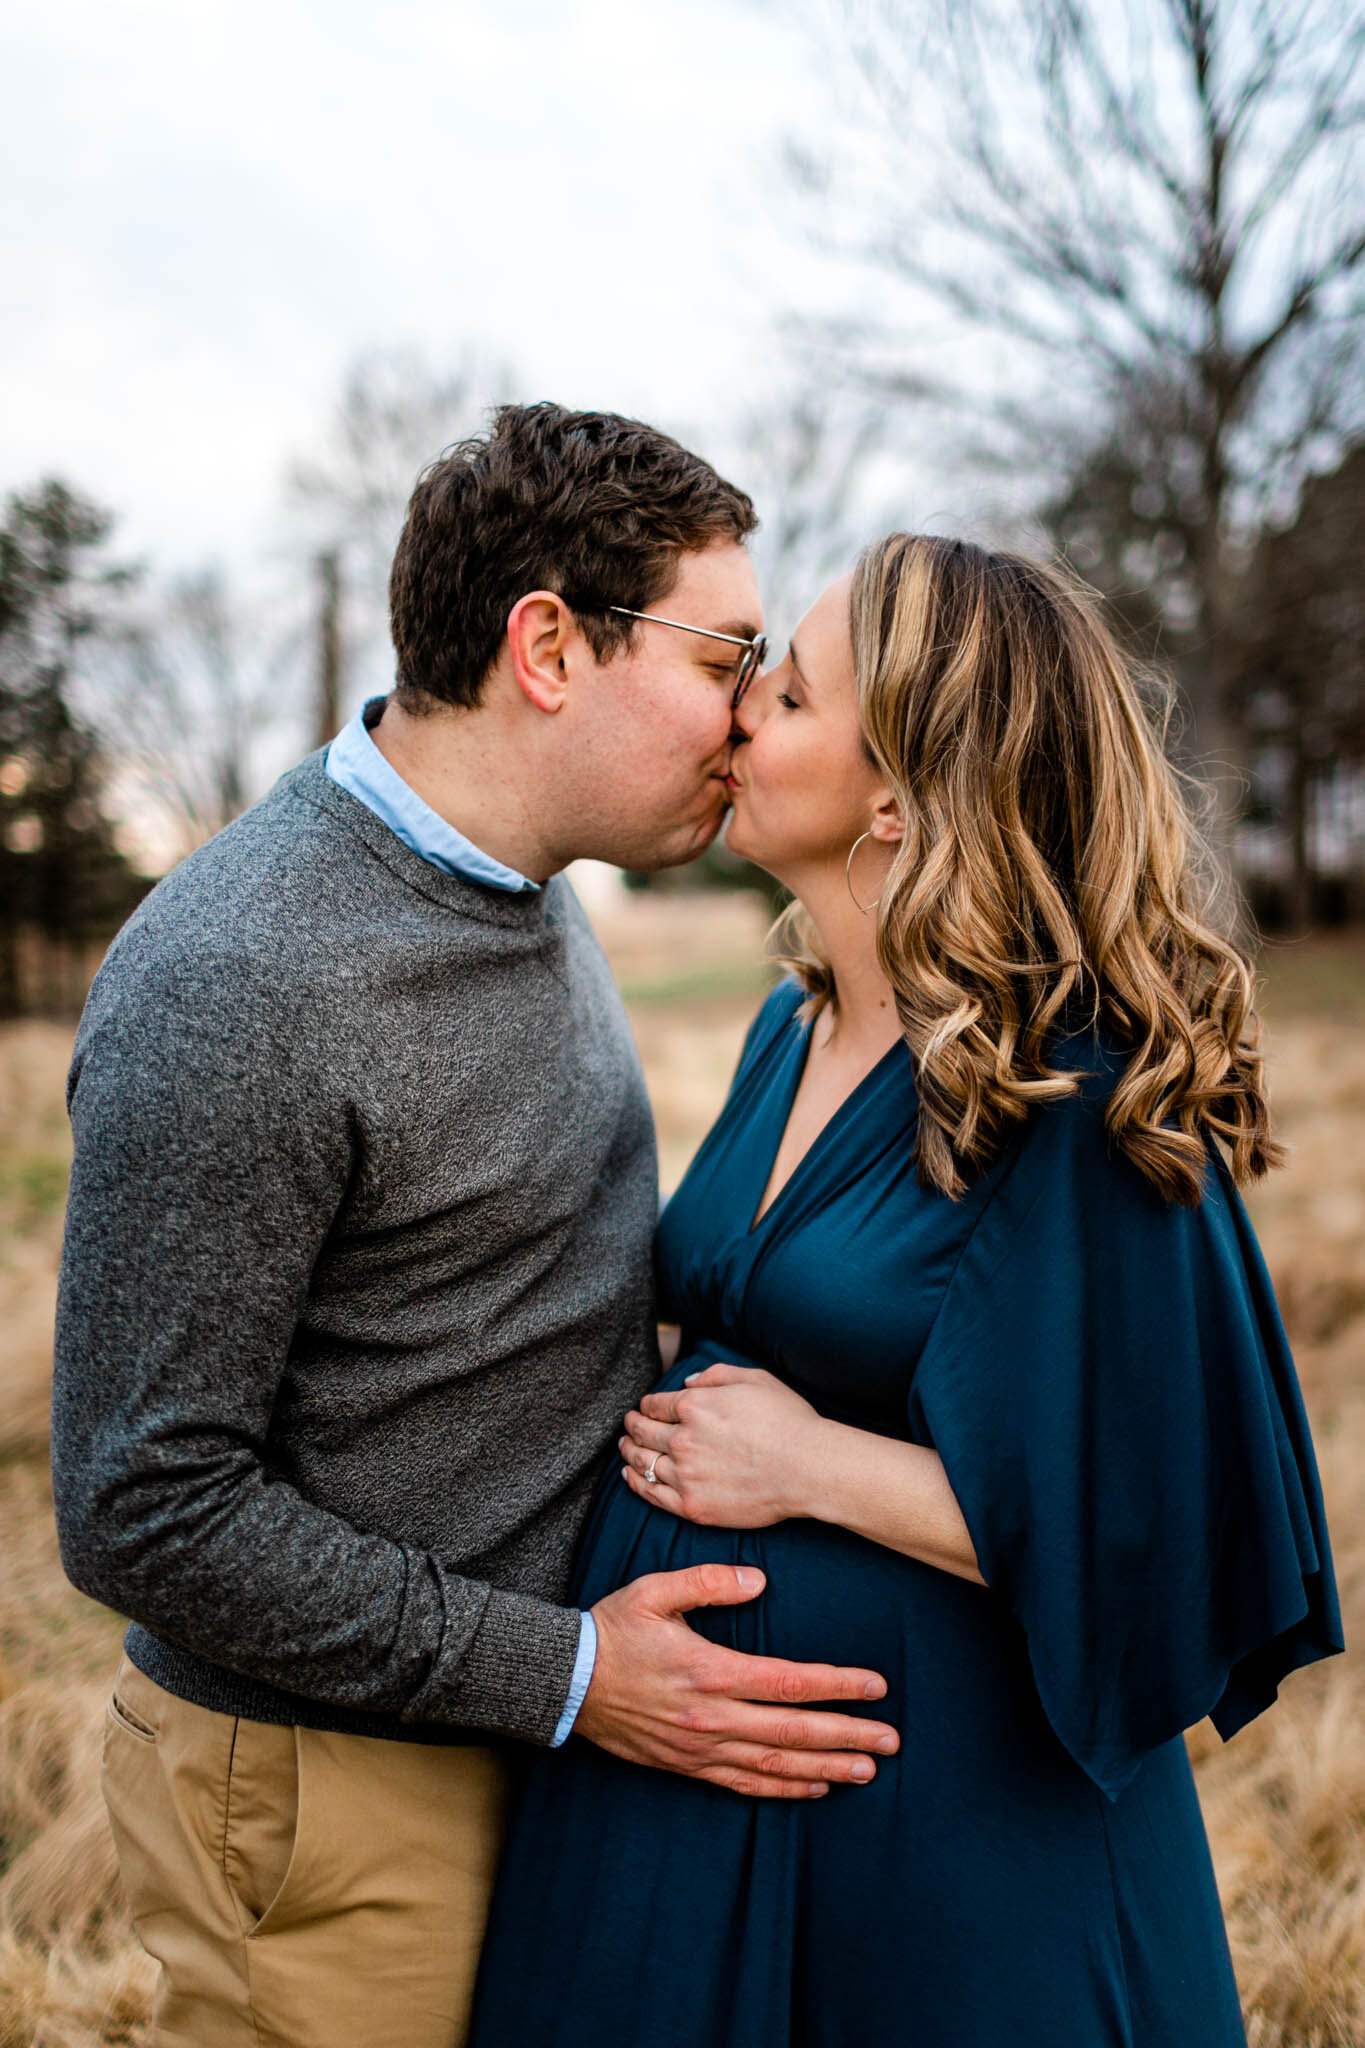 Raleigh Newborn Photographer | By G. Lin Photography | Portrait of man and woman kissing outdoors at NCMA